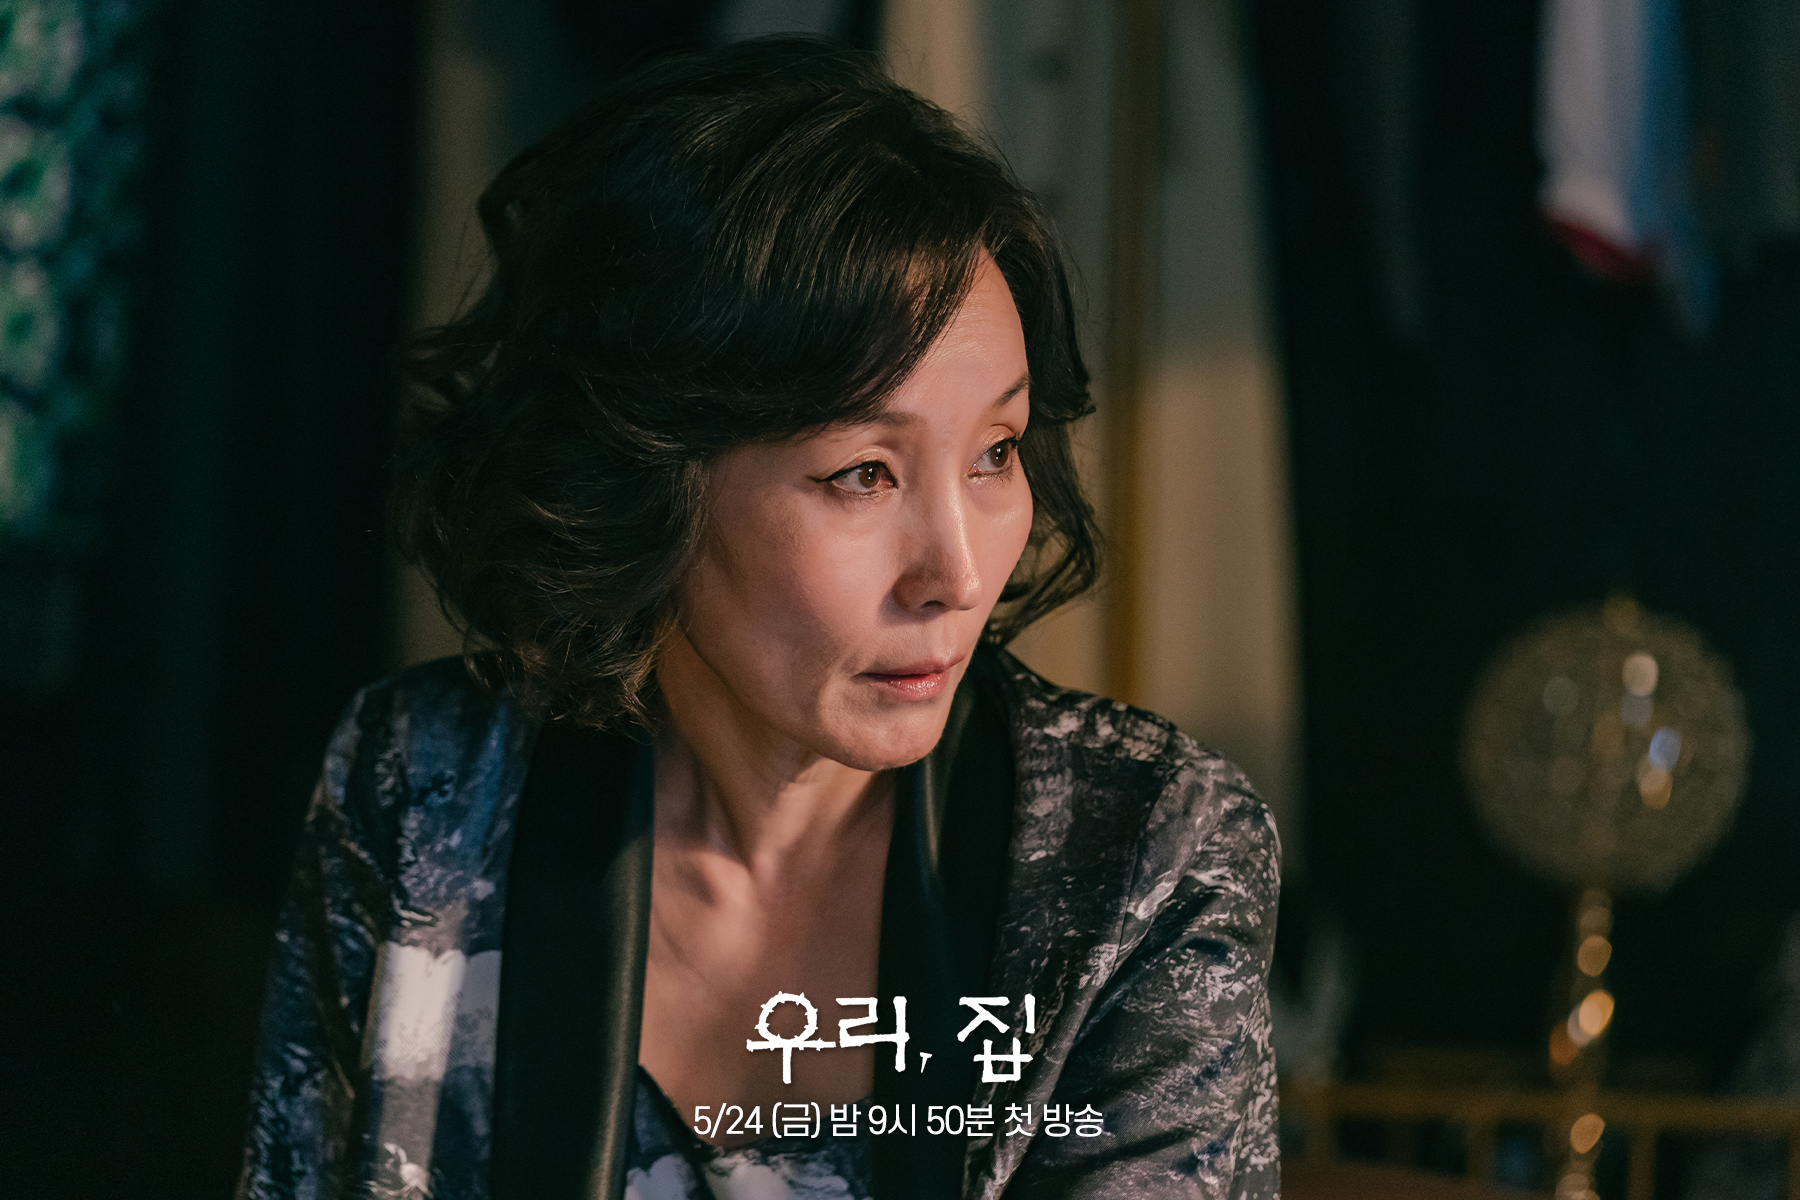 Lee Hye Young And Kim Hee Sun Show Intense Chemistry In 